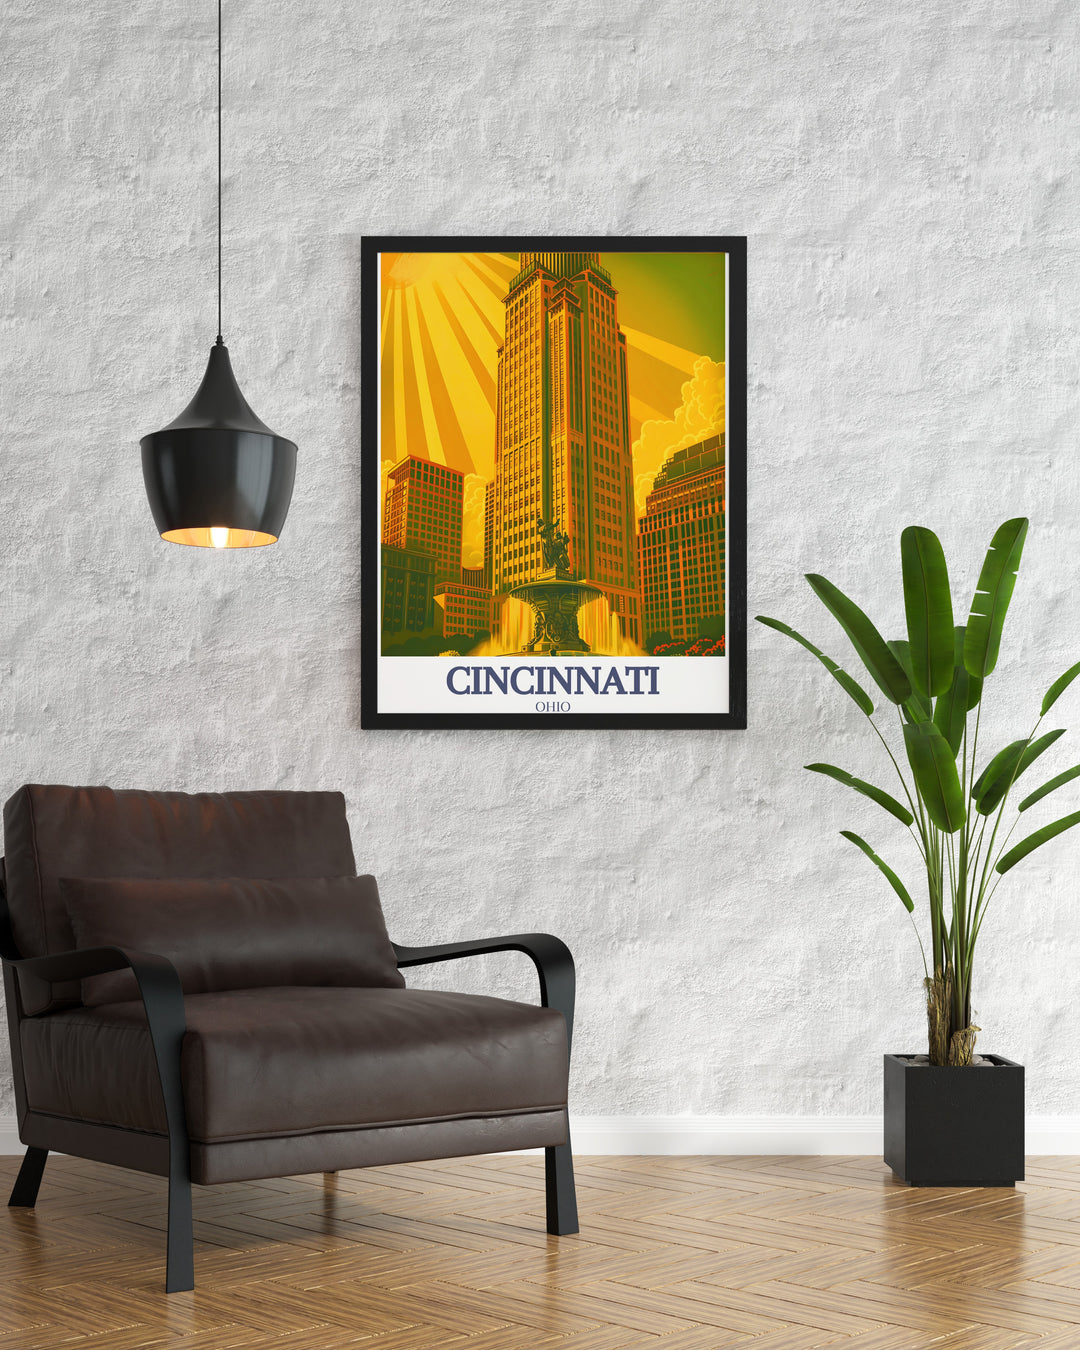 Stunning Cincinnati wall art featuring Carew Tower and Tyler Davidson Fountain a celebration of the citys rich heritage and architectural marvels perfect for personalized gifts and special occasions